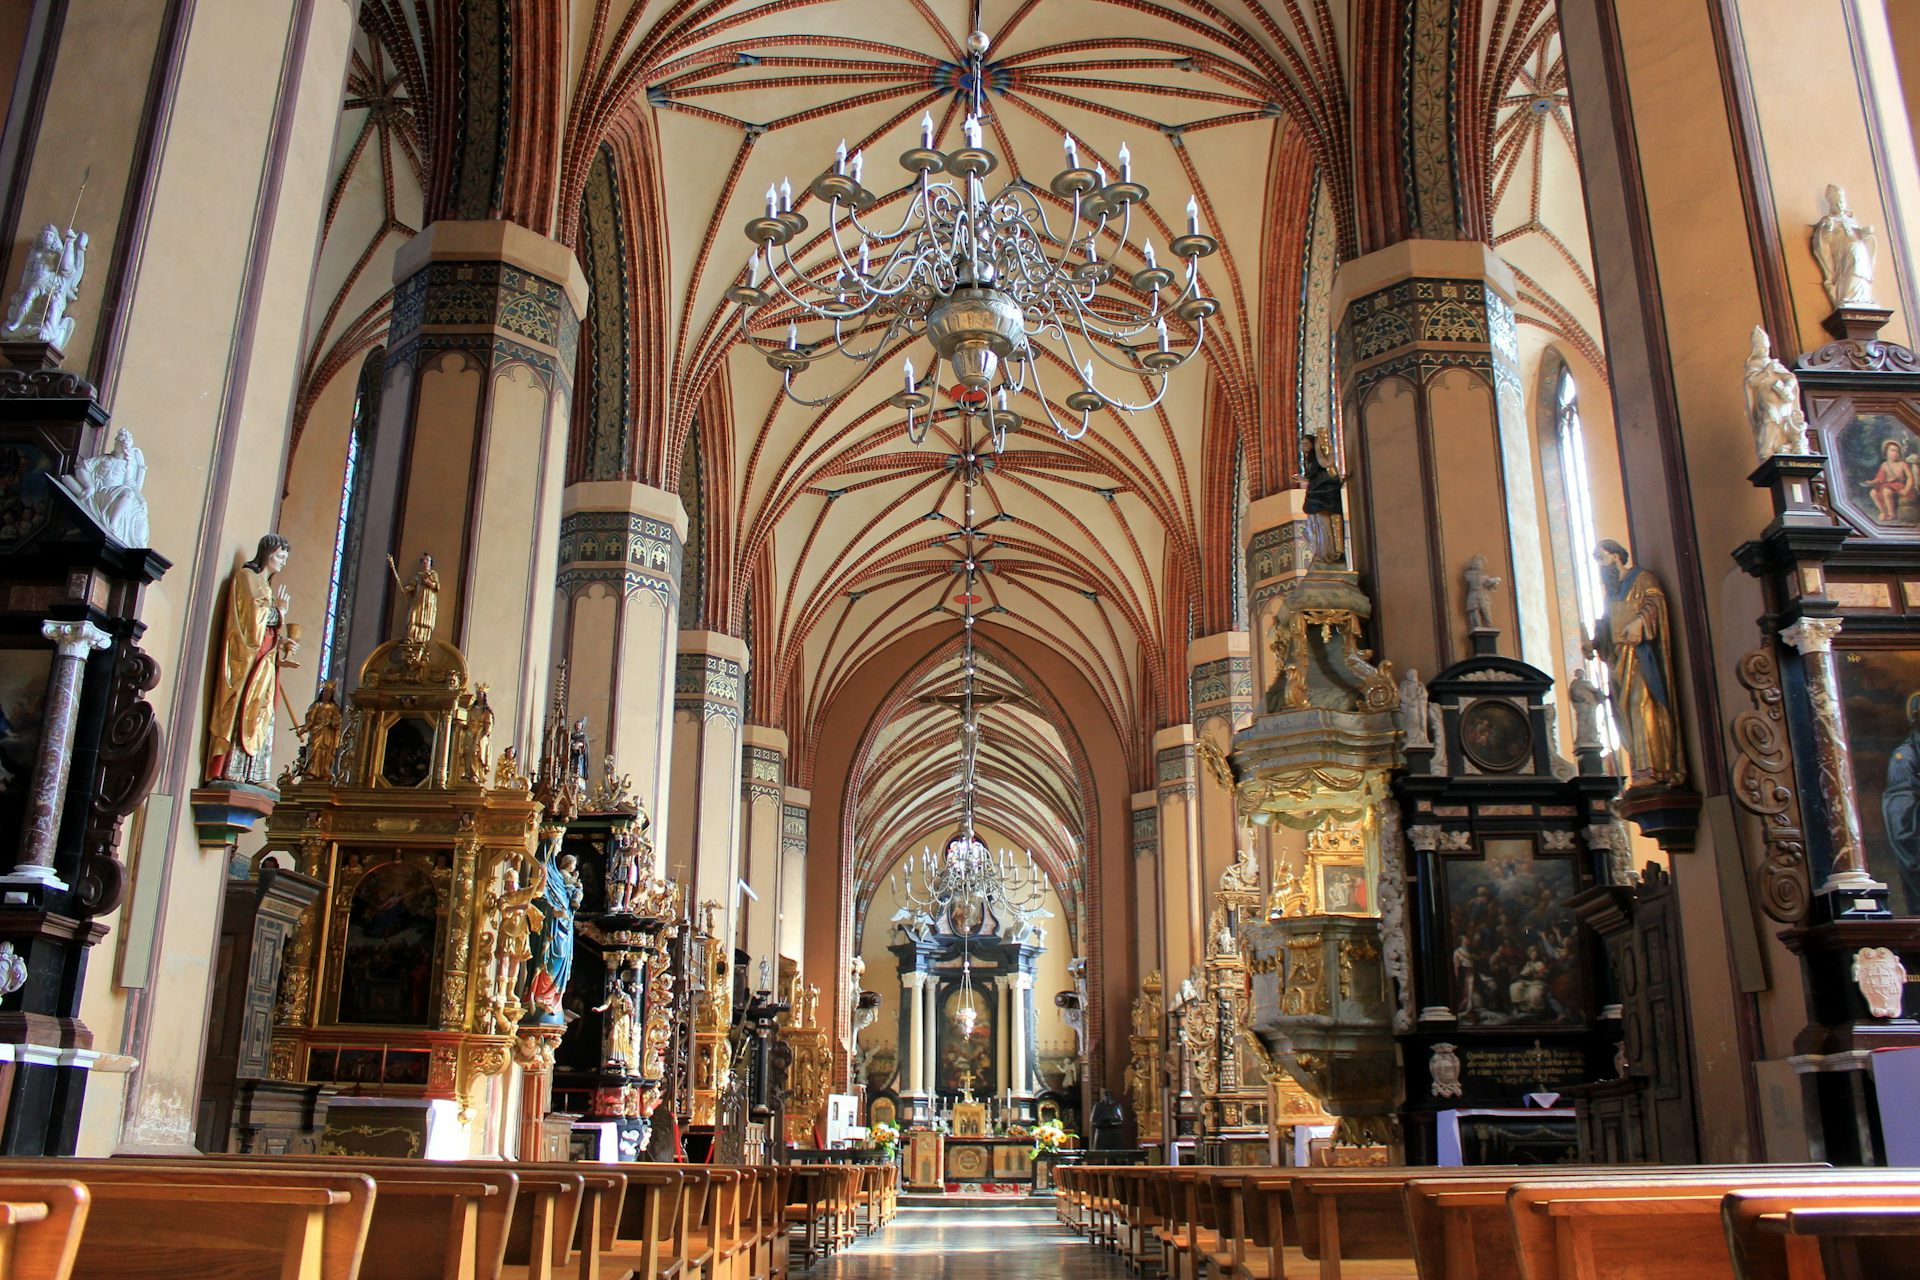 Photo of the inside of a cathedral with high vaulted ceiling, many columns and statues.